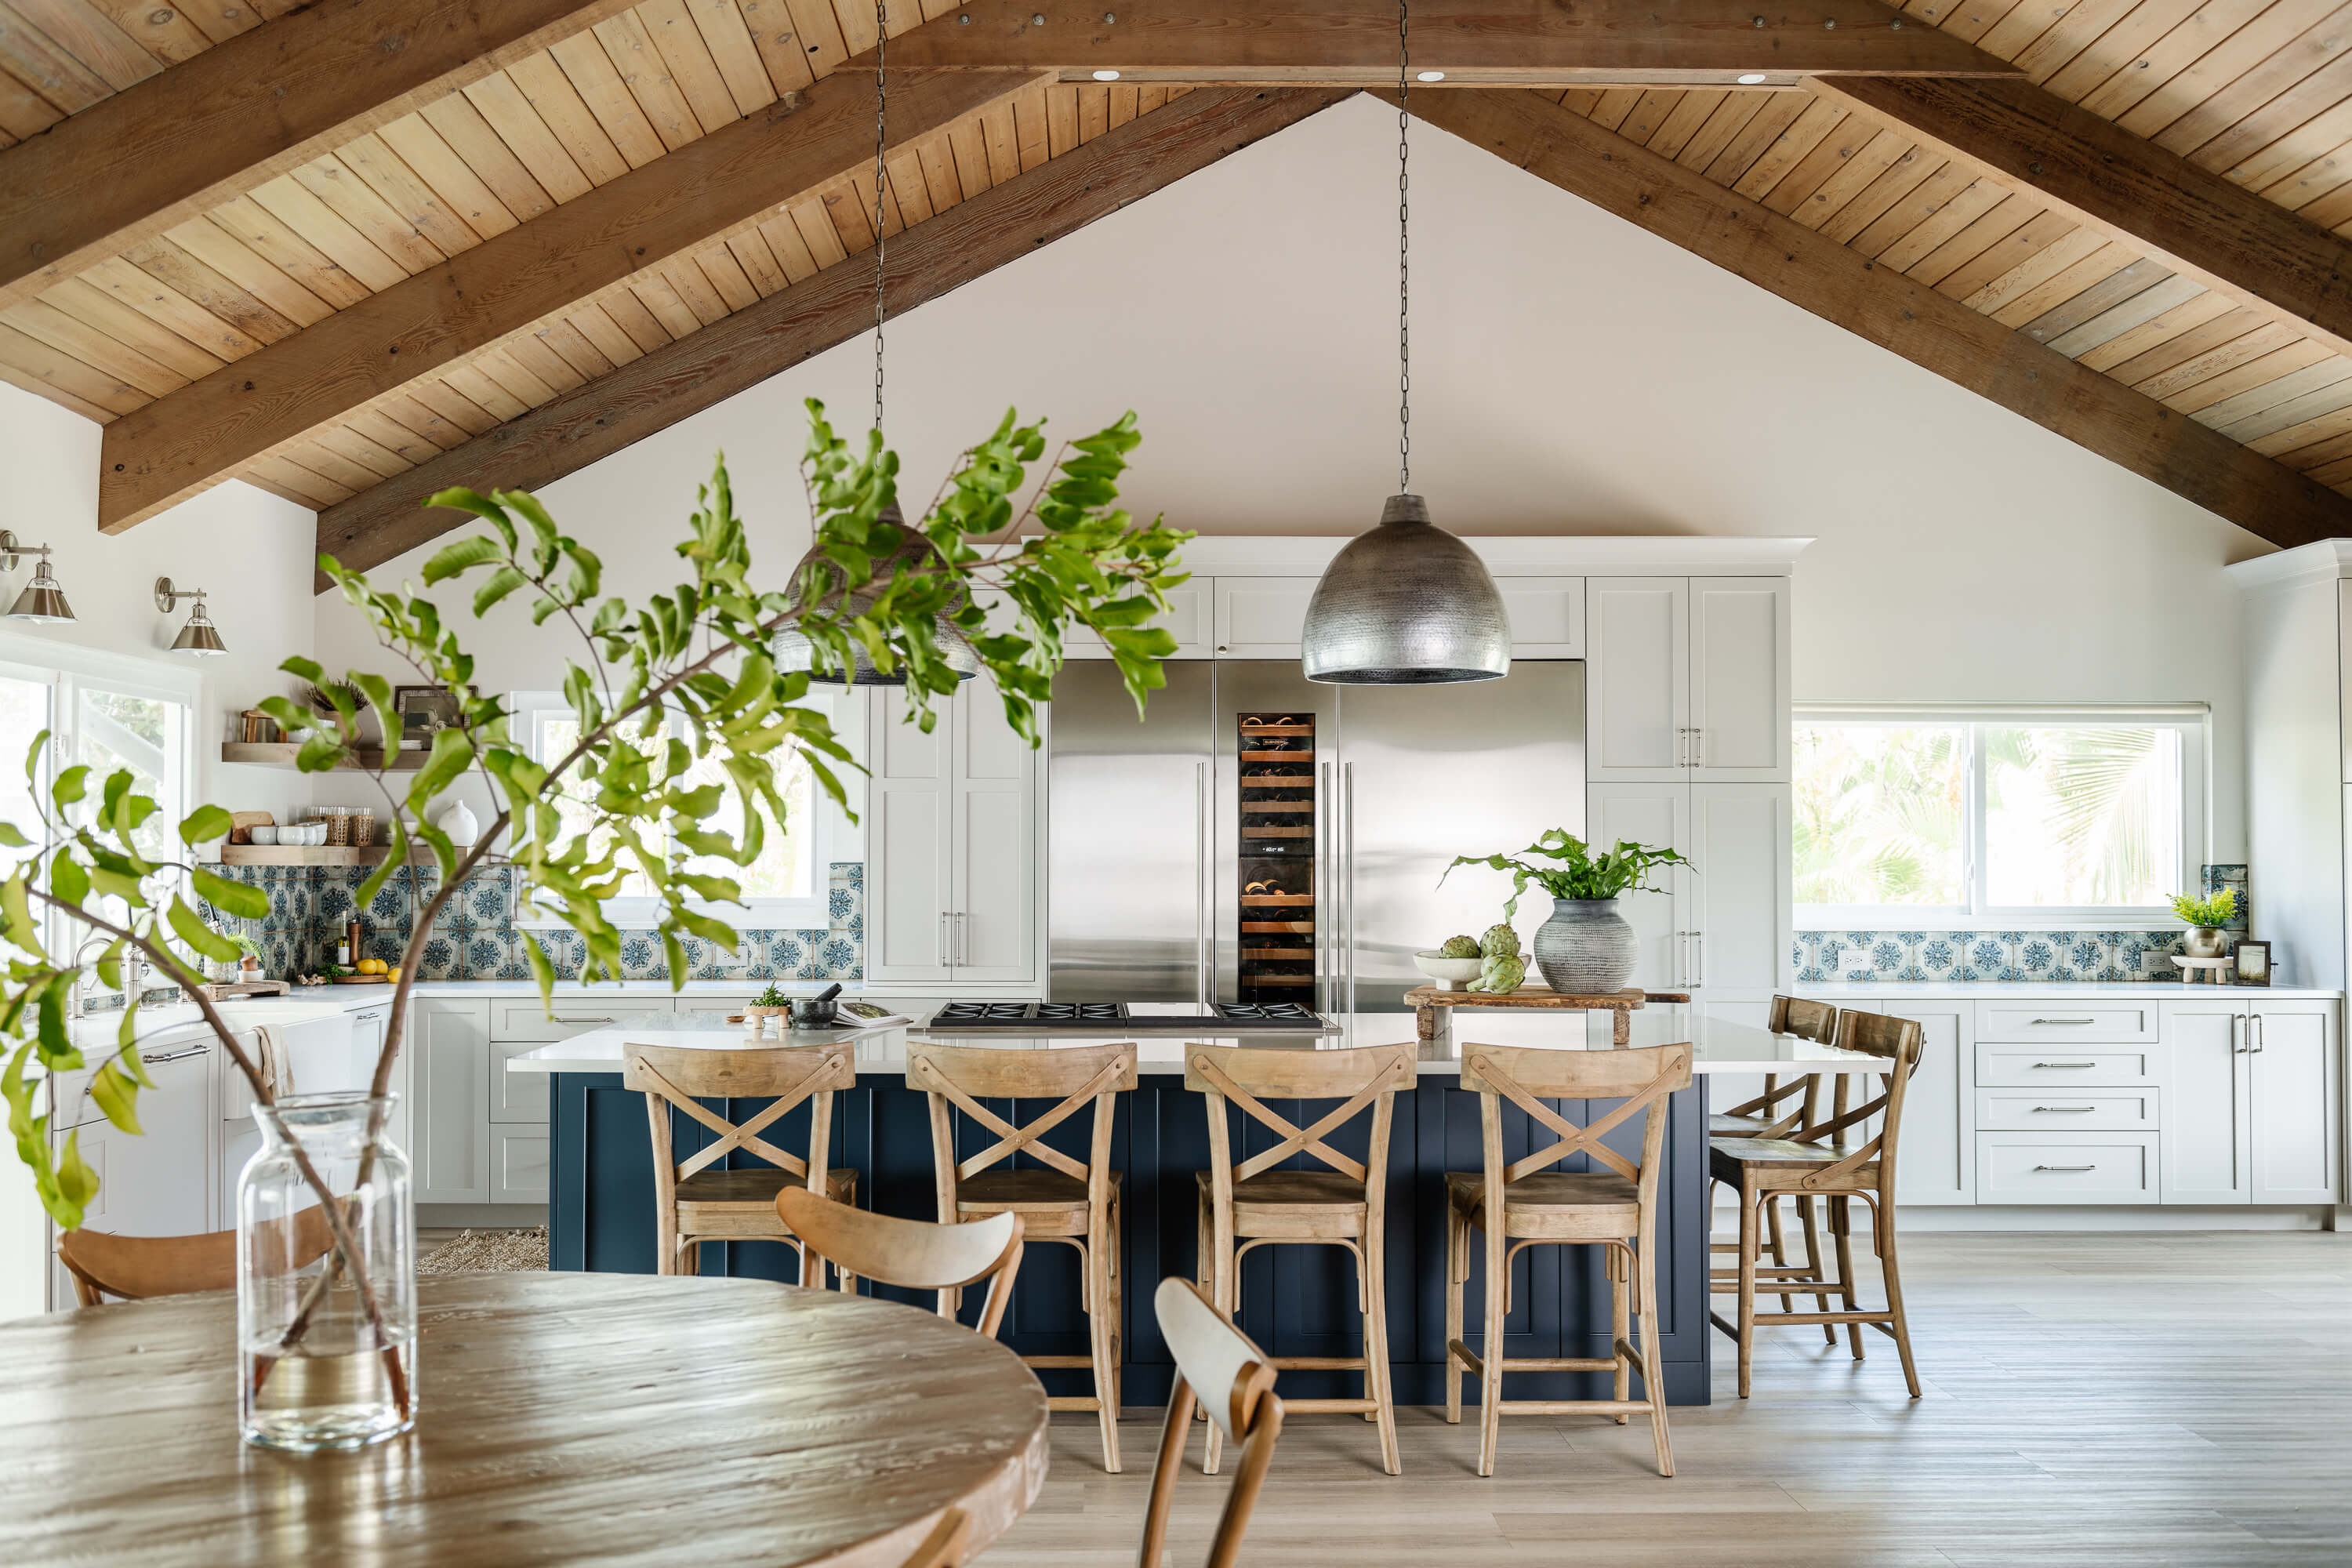 A stunning modern farmhouse kitchen design with two-toned cabinets in white and navy blue painted finishes.